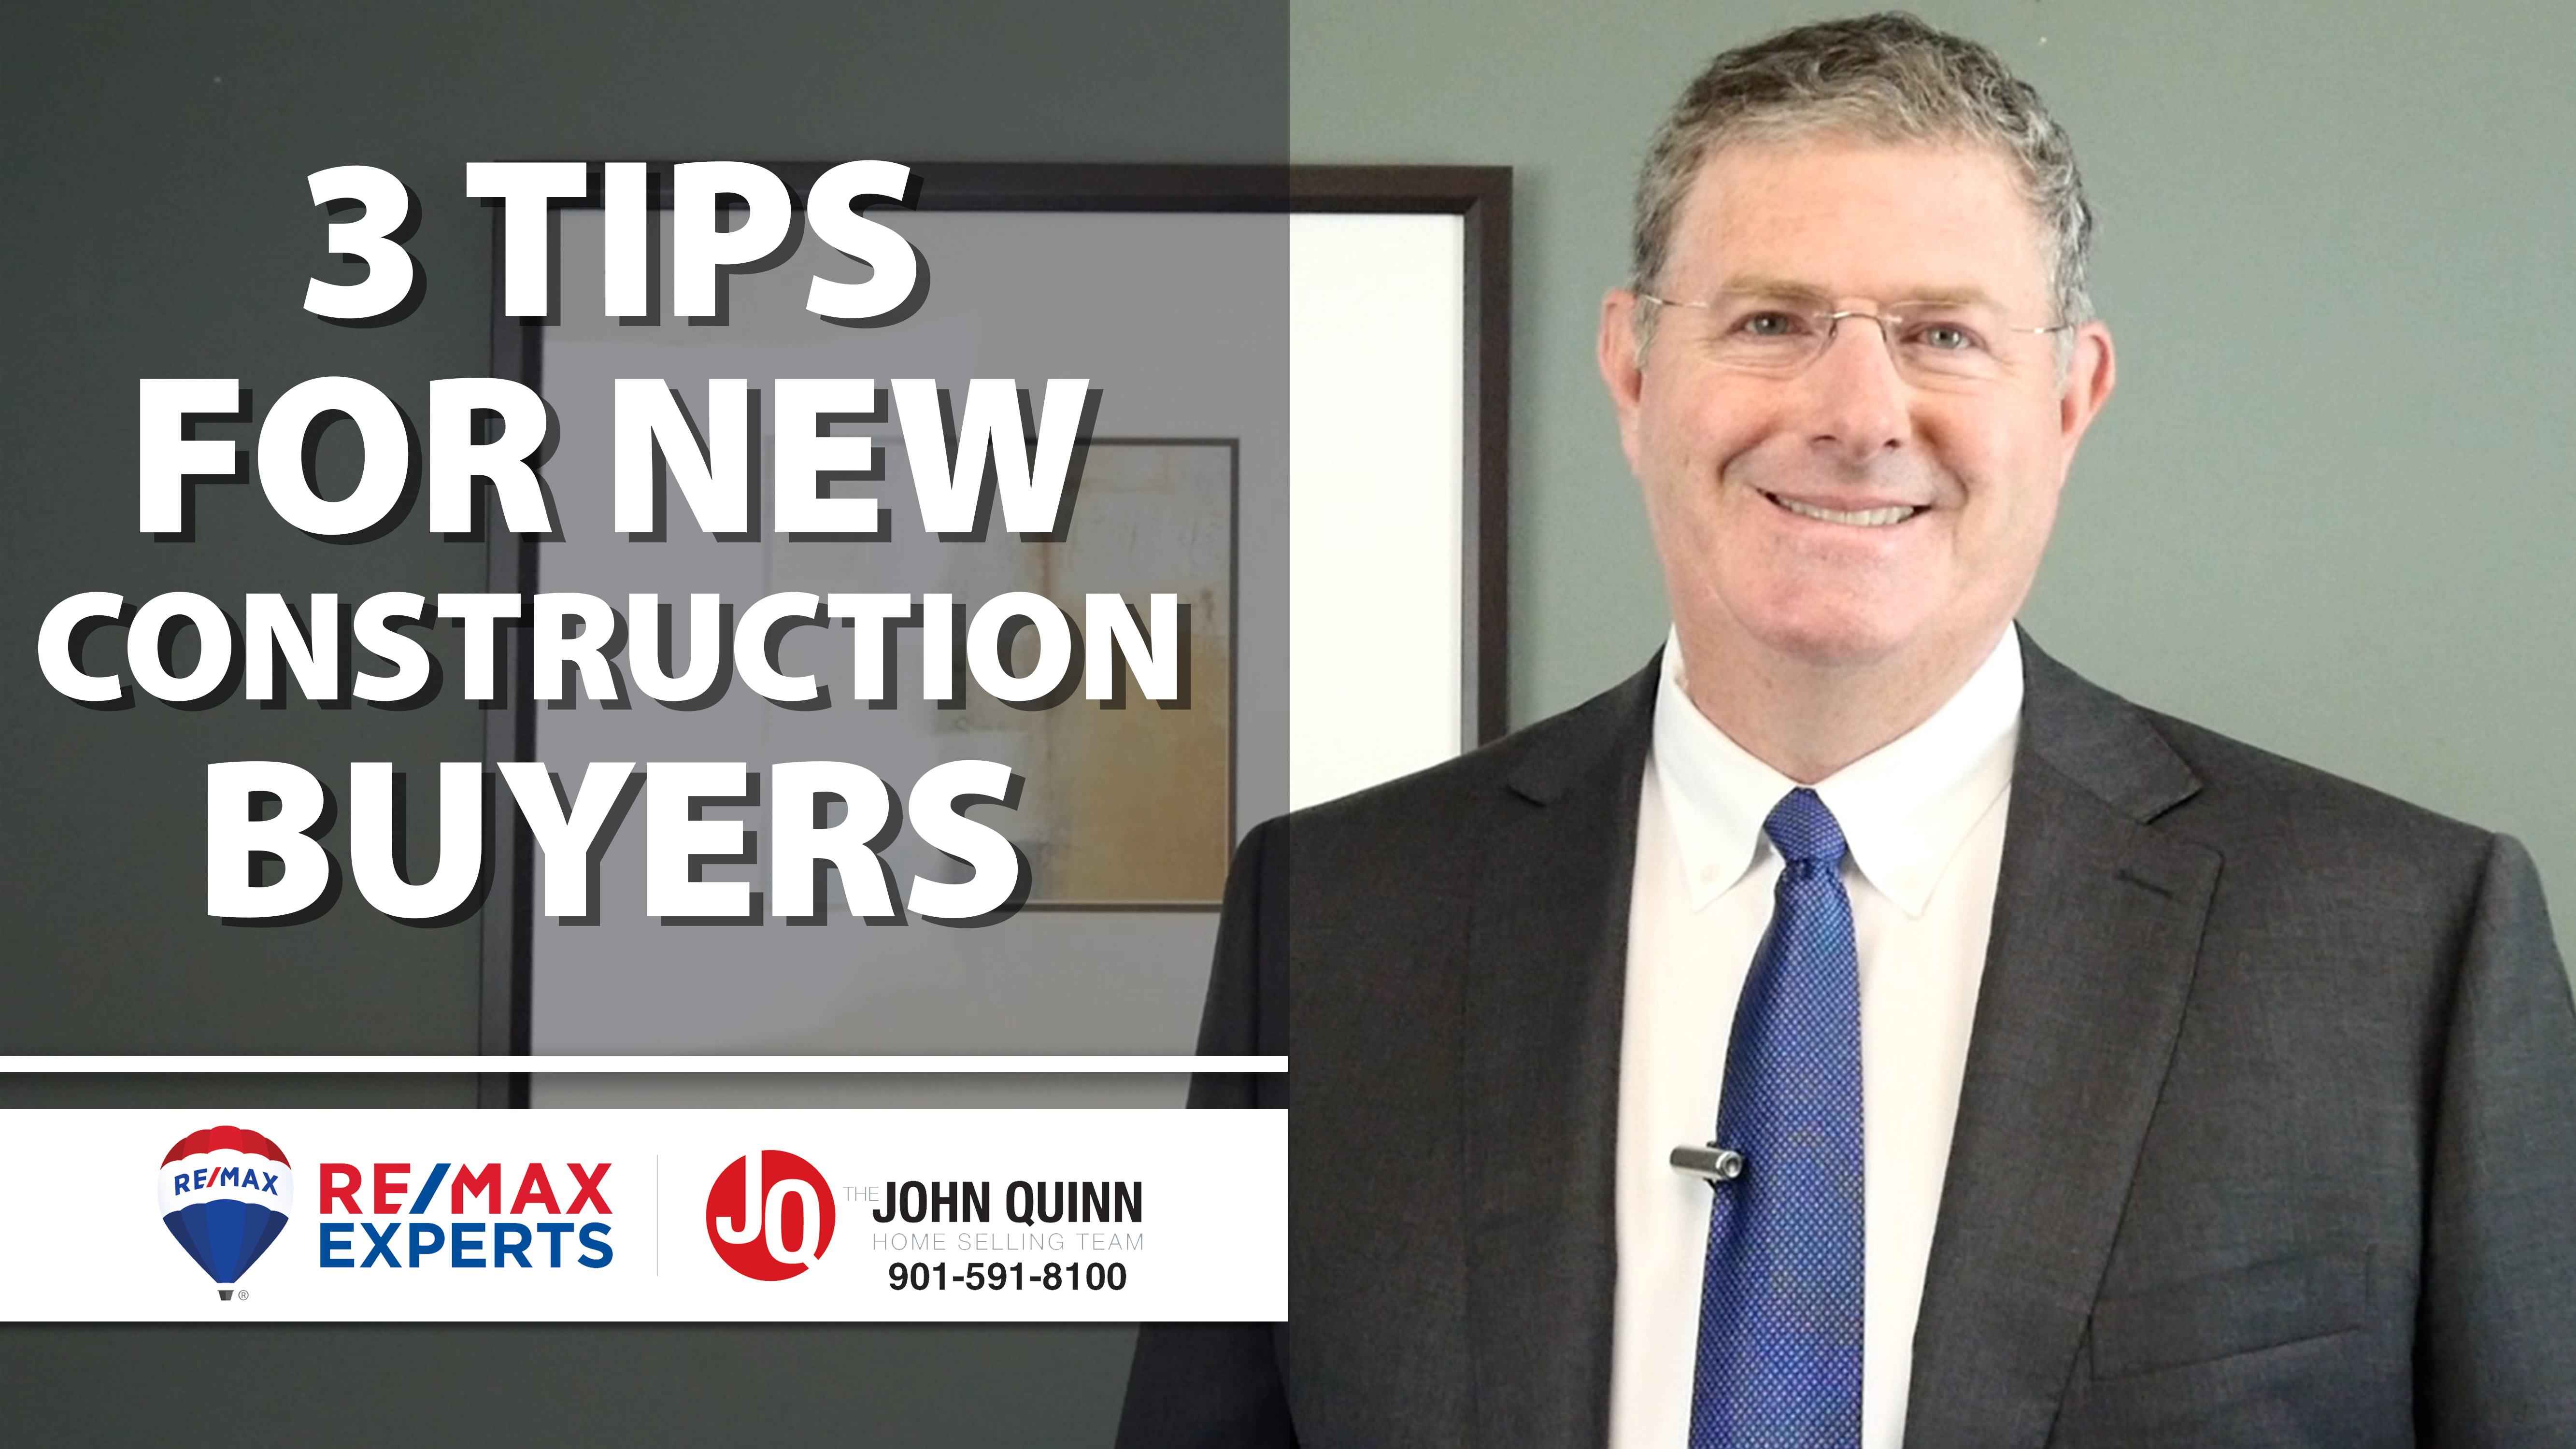 Saving Time & Money on New Construction Purchases